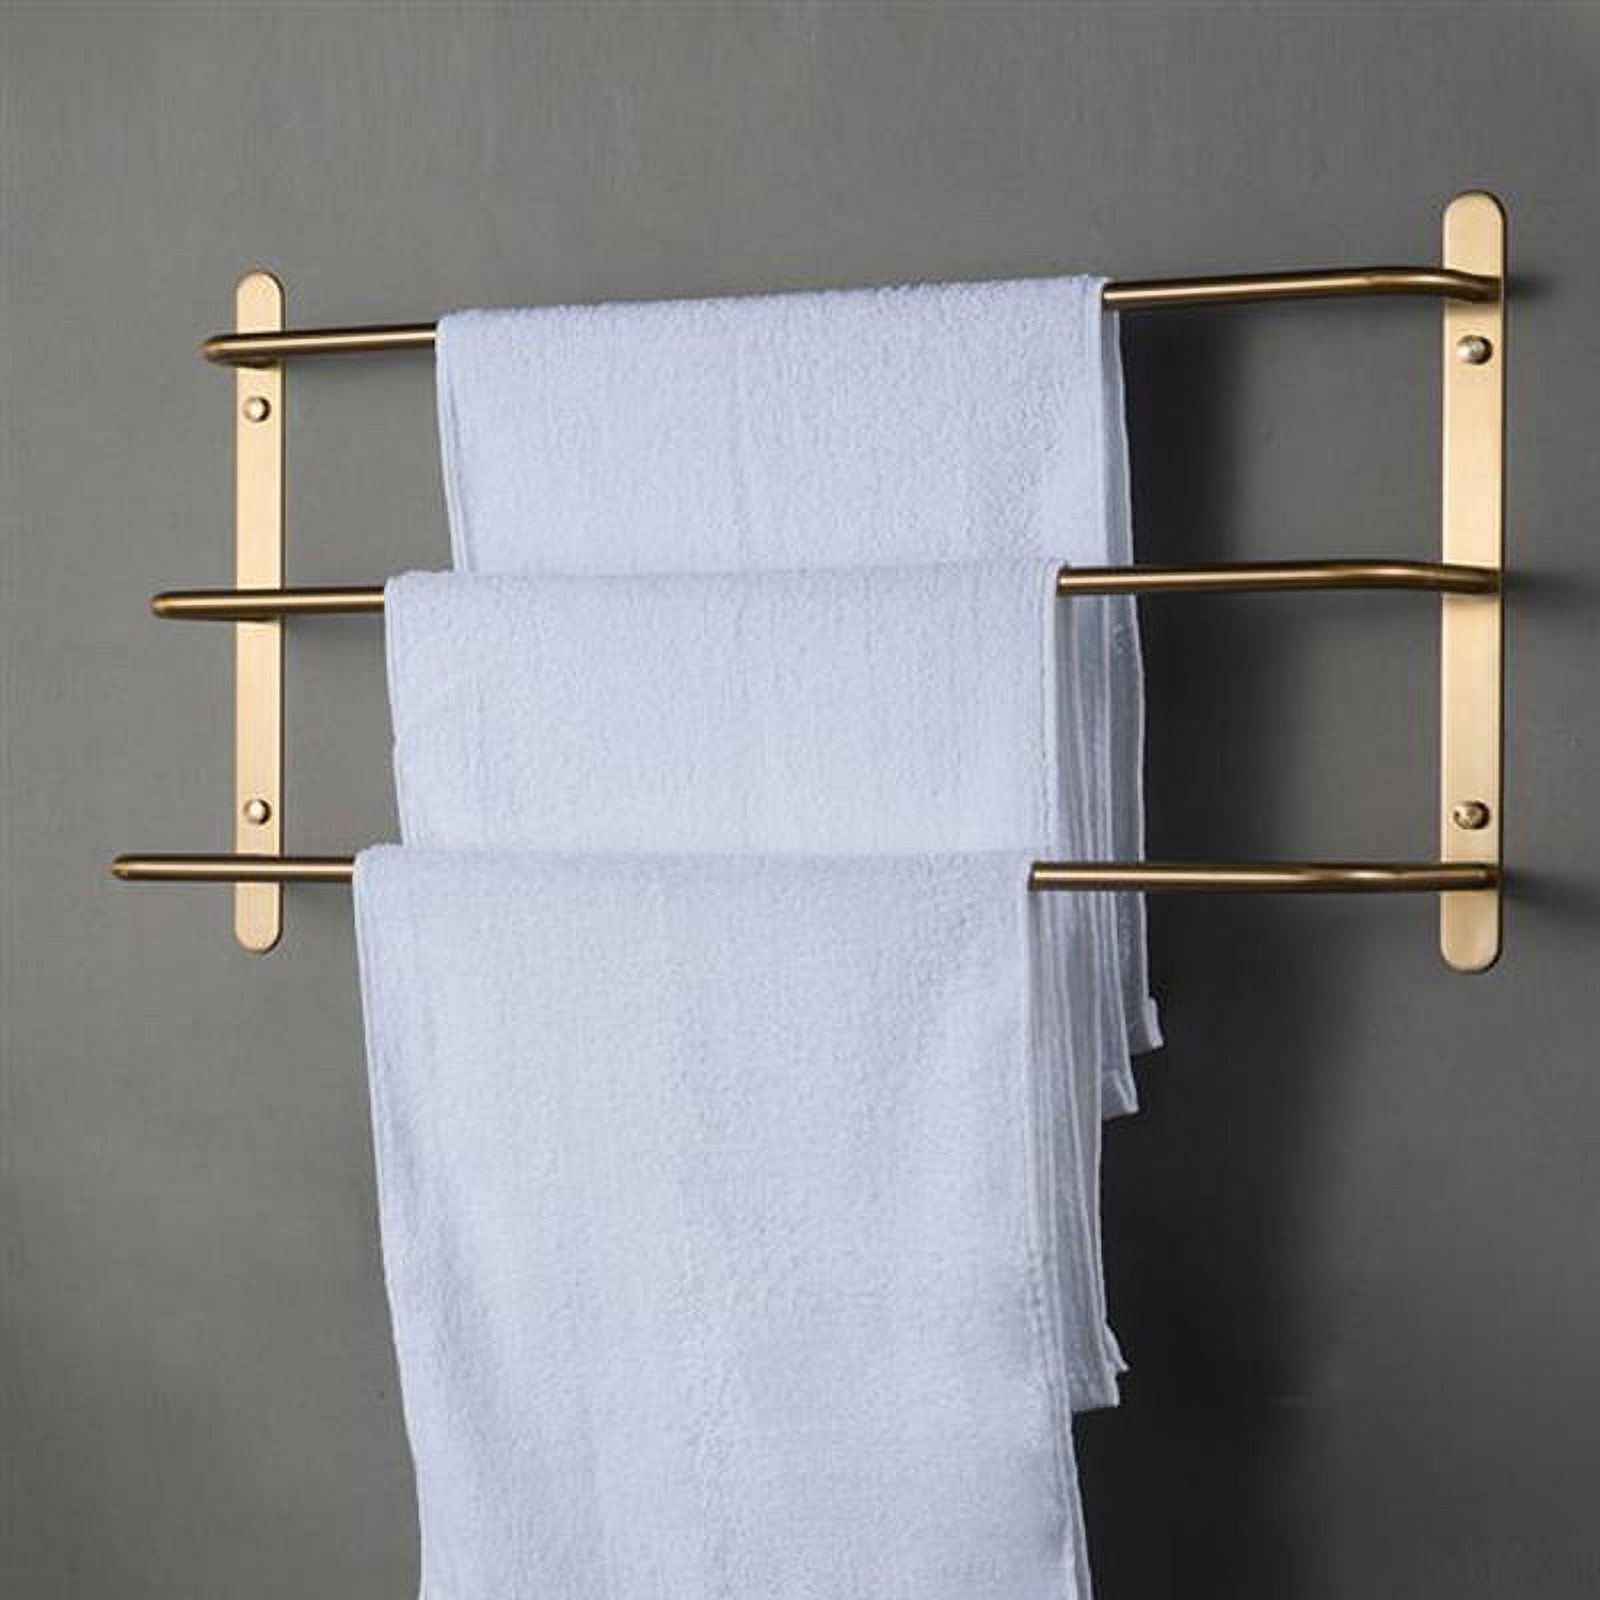 3-Layers Towel Bar, Wall Mounted Towel Rail Stainless Steel Towel Rack Towel Holder for Bathroom Kitchen, 45cm - image 1 of 7